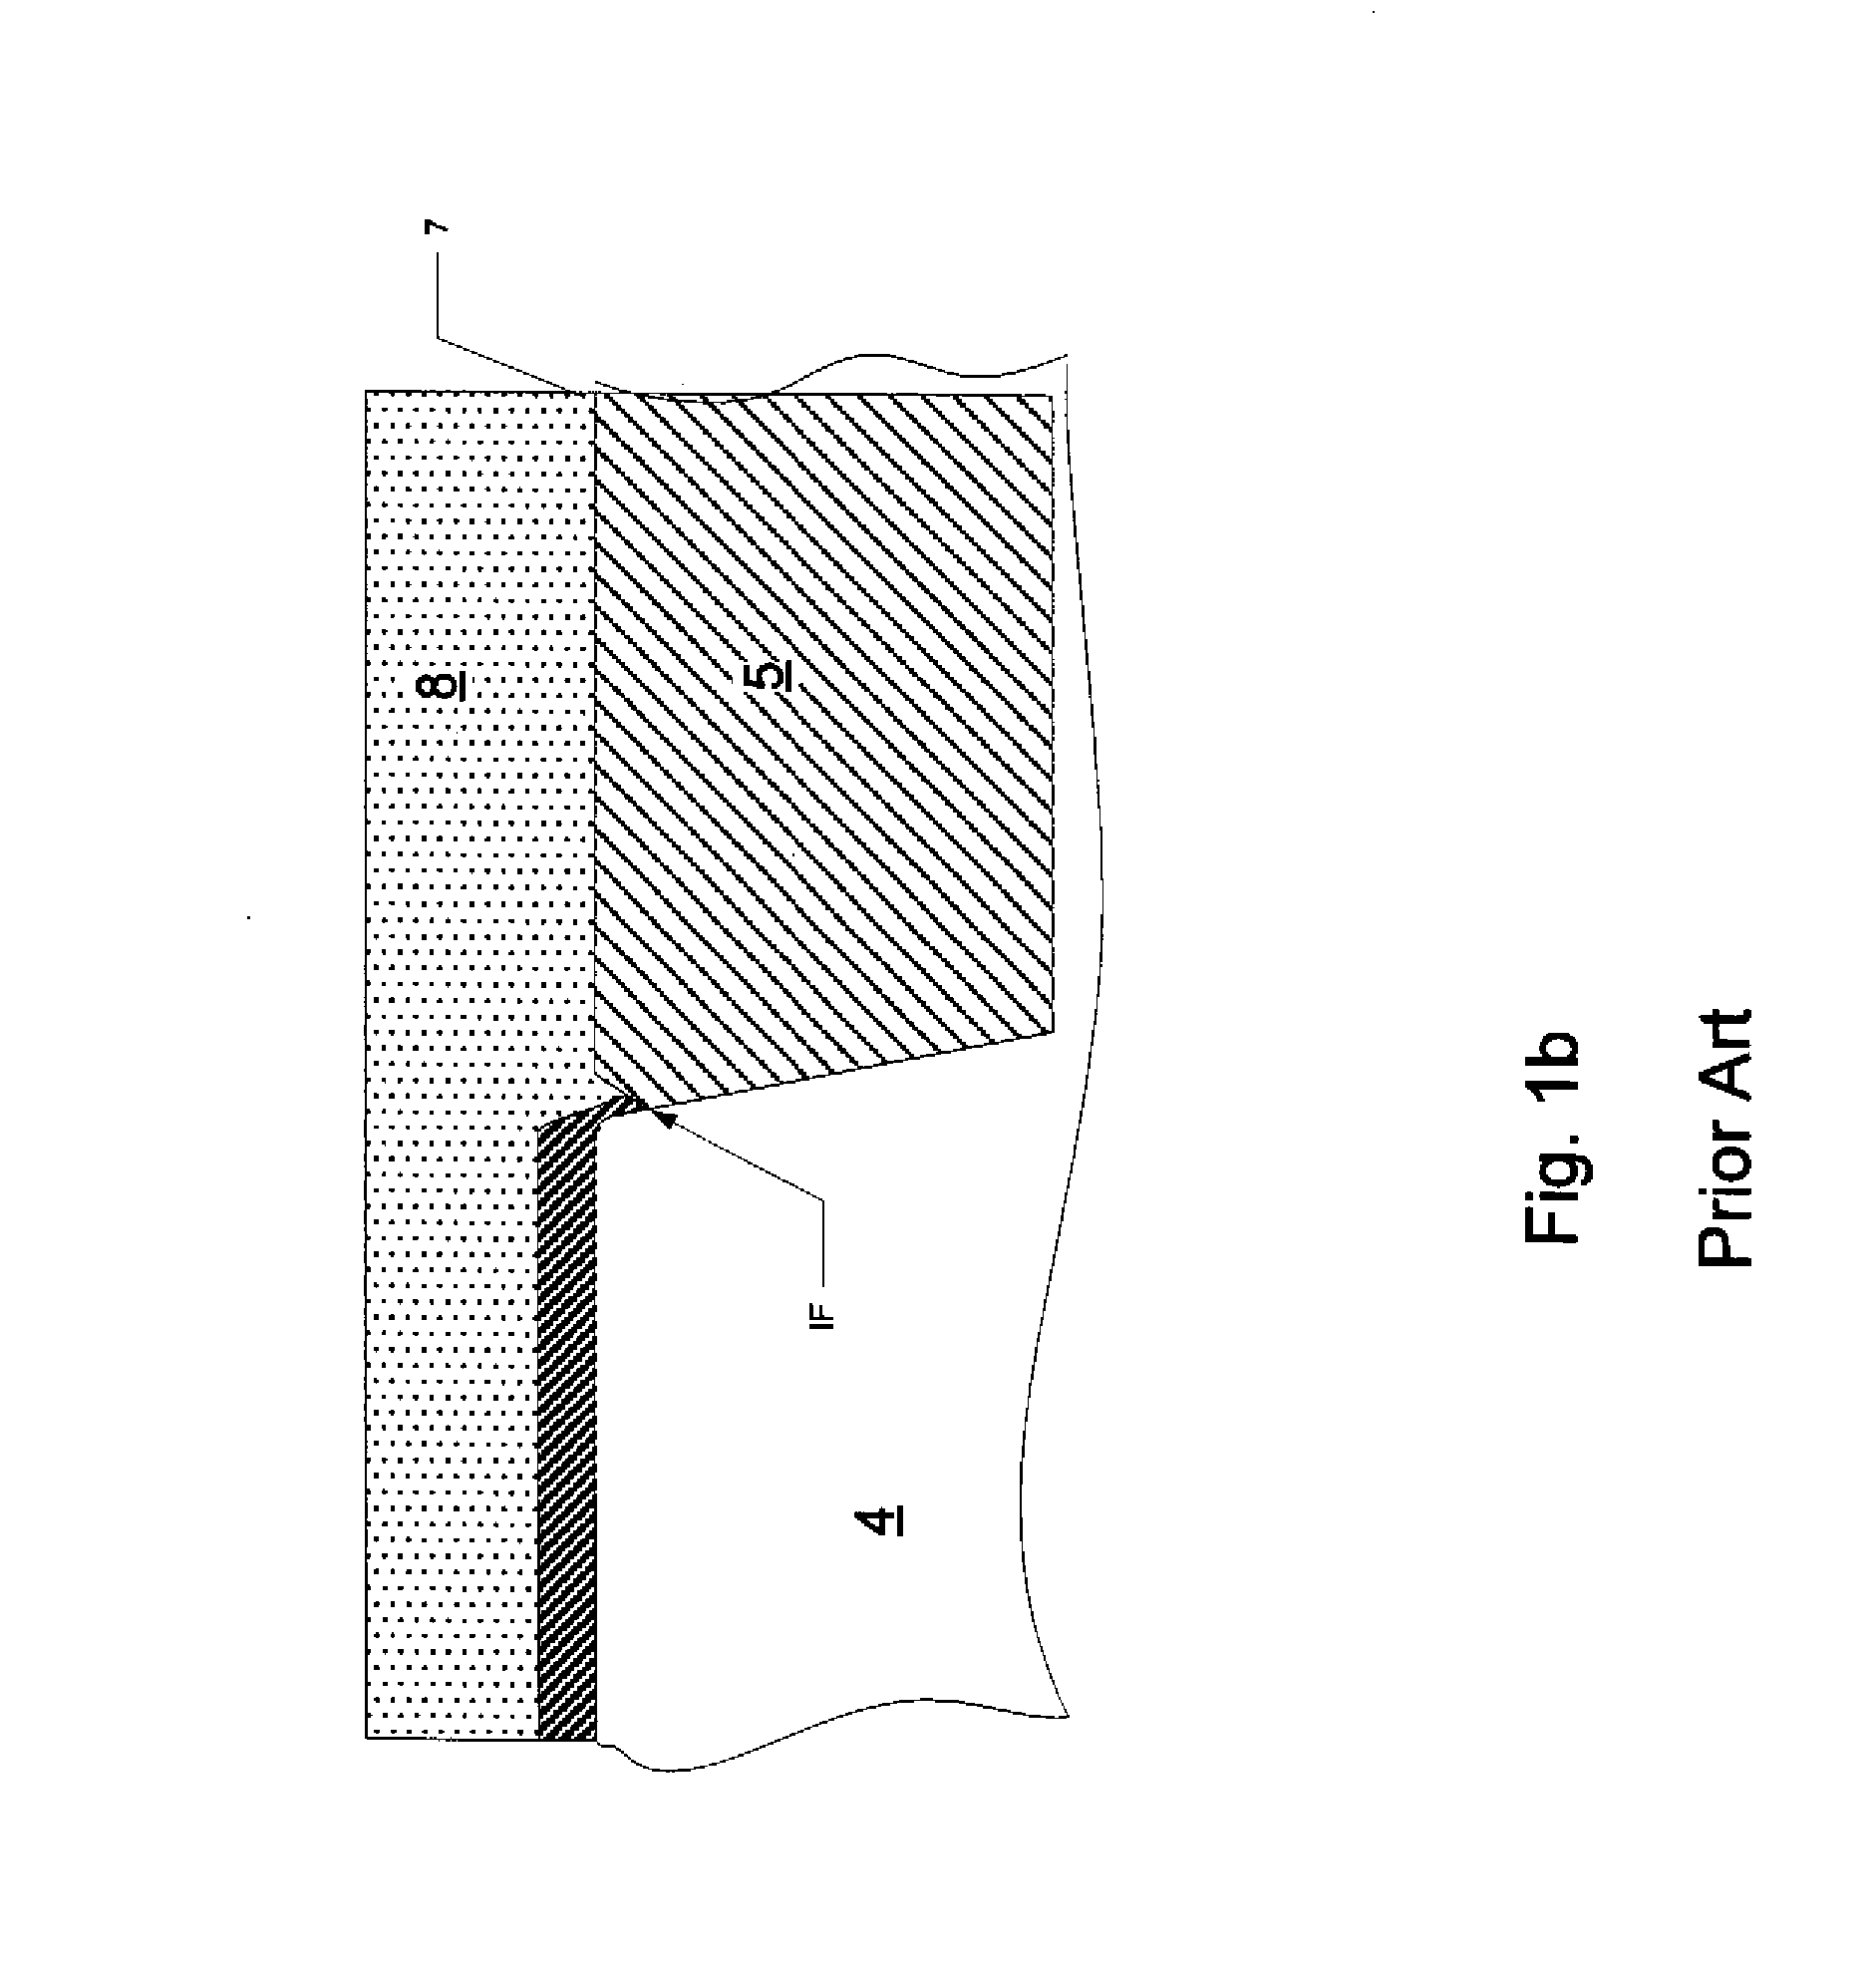 I-shaped gate electrode for improved sub-threshold mosfet performance